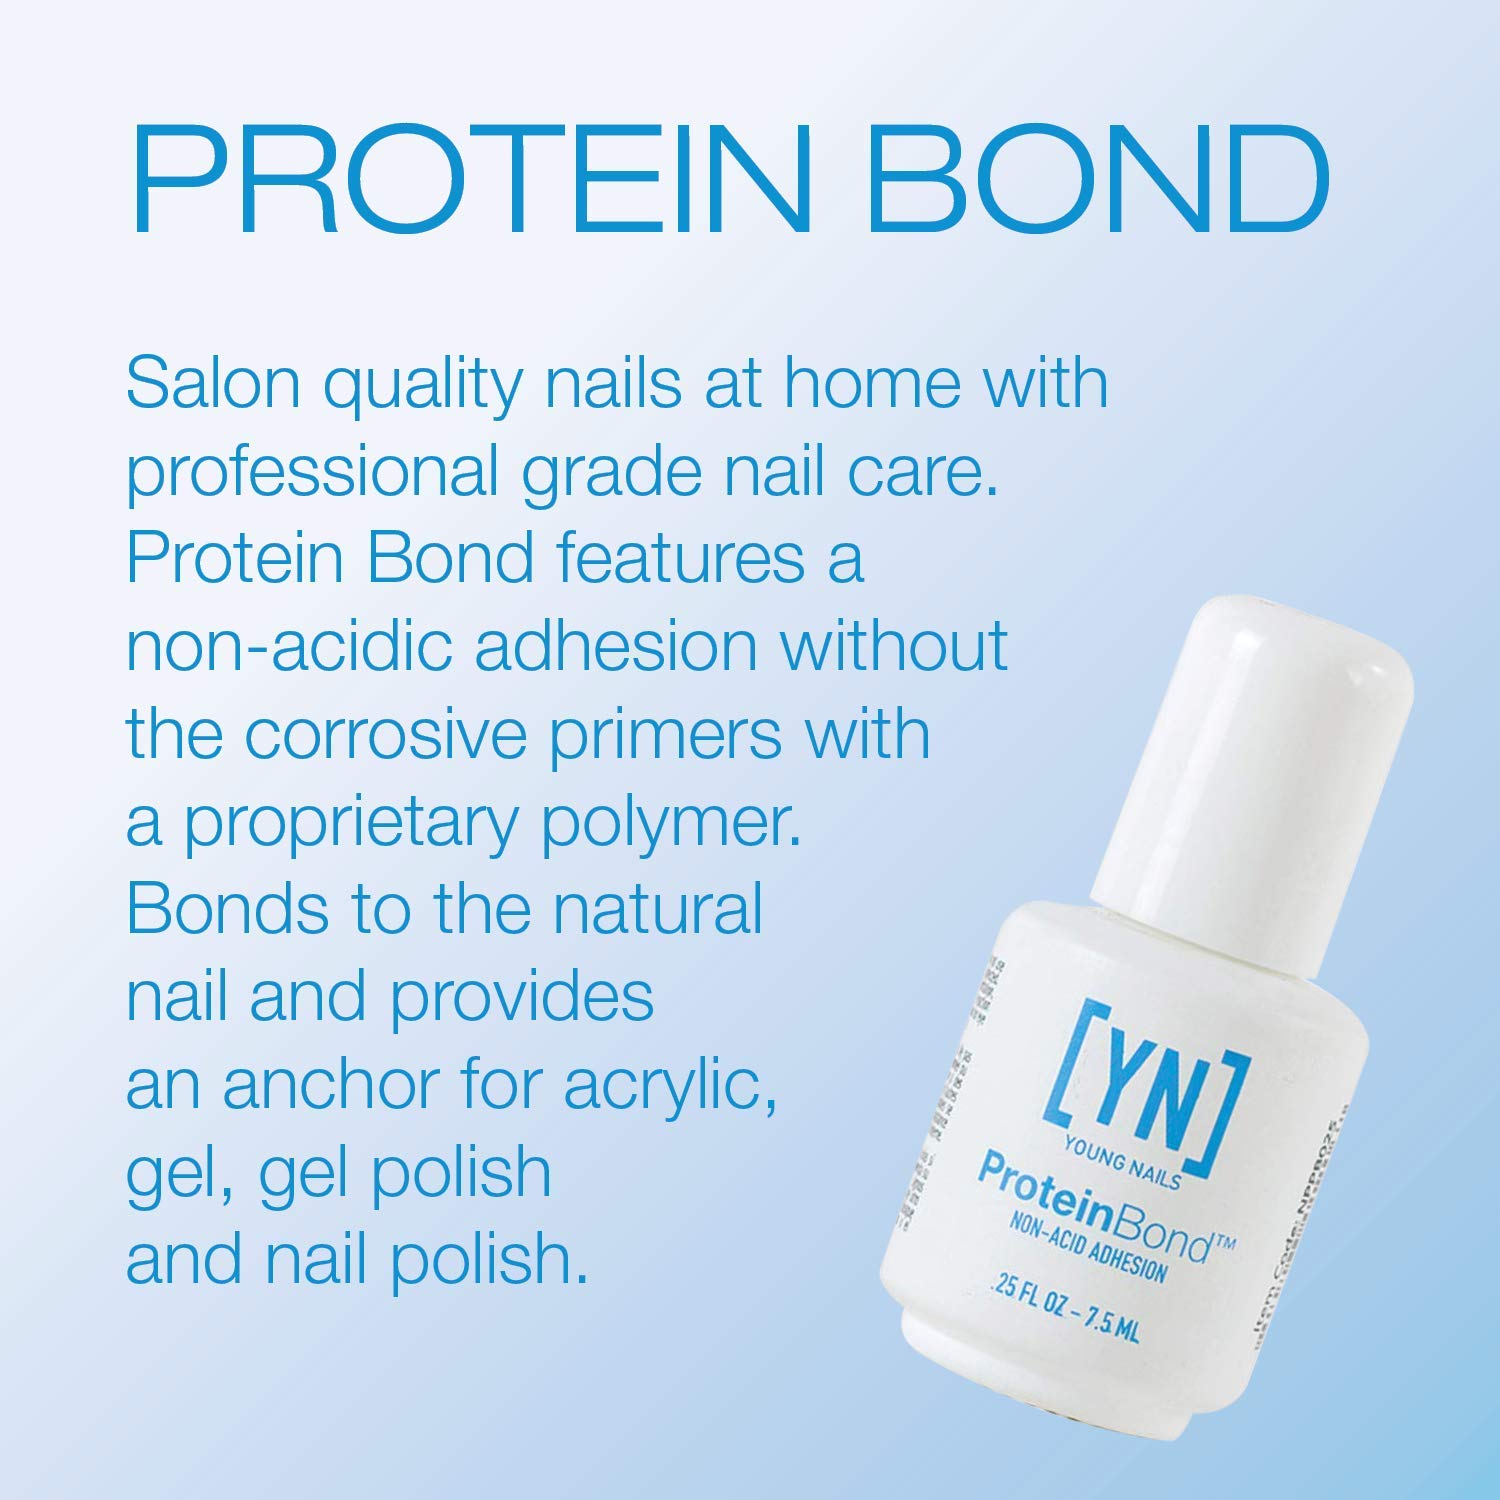 Young Nails Protein Bond. This Protein Bond Nails is the leader in non-acid adhesion without the corrosive primers.